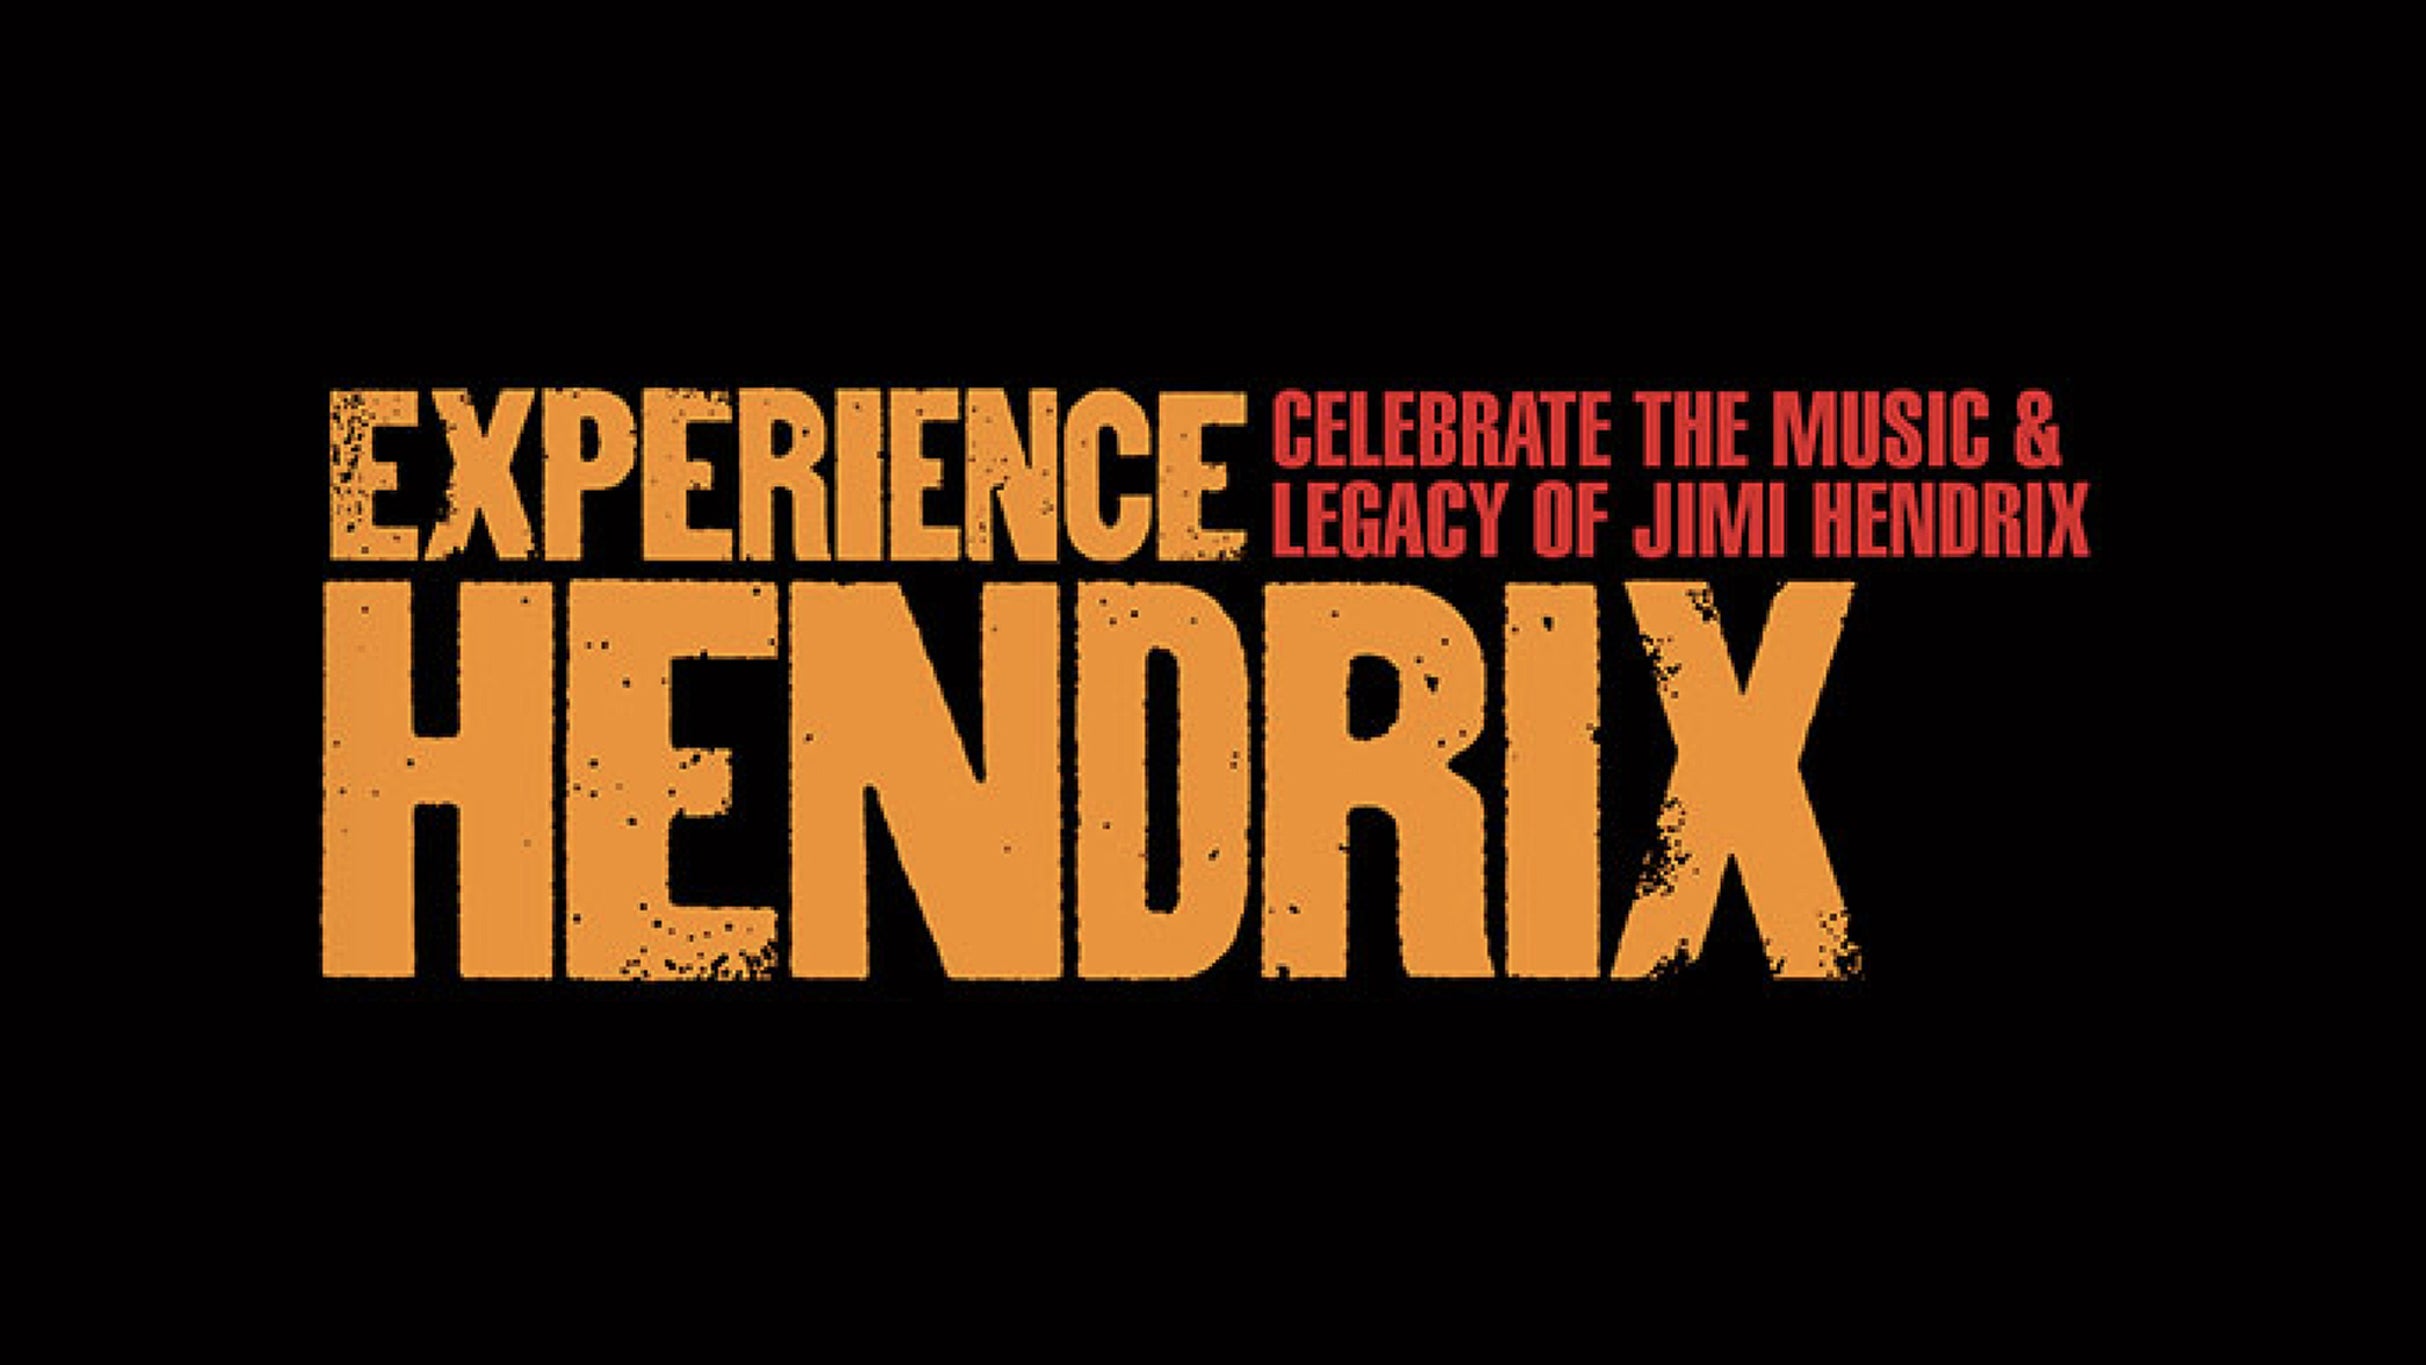 Experience Hendrix presale code for approved tickets in Evans